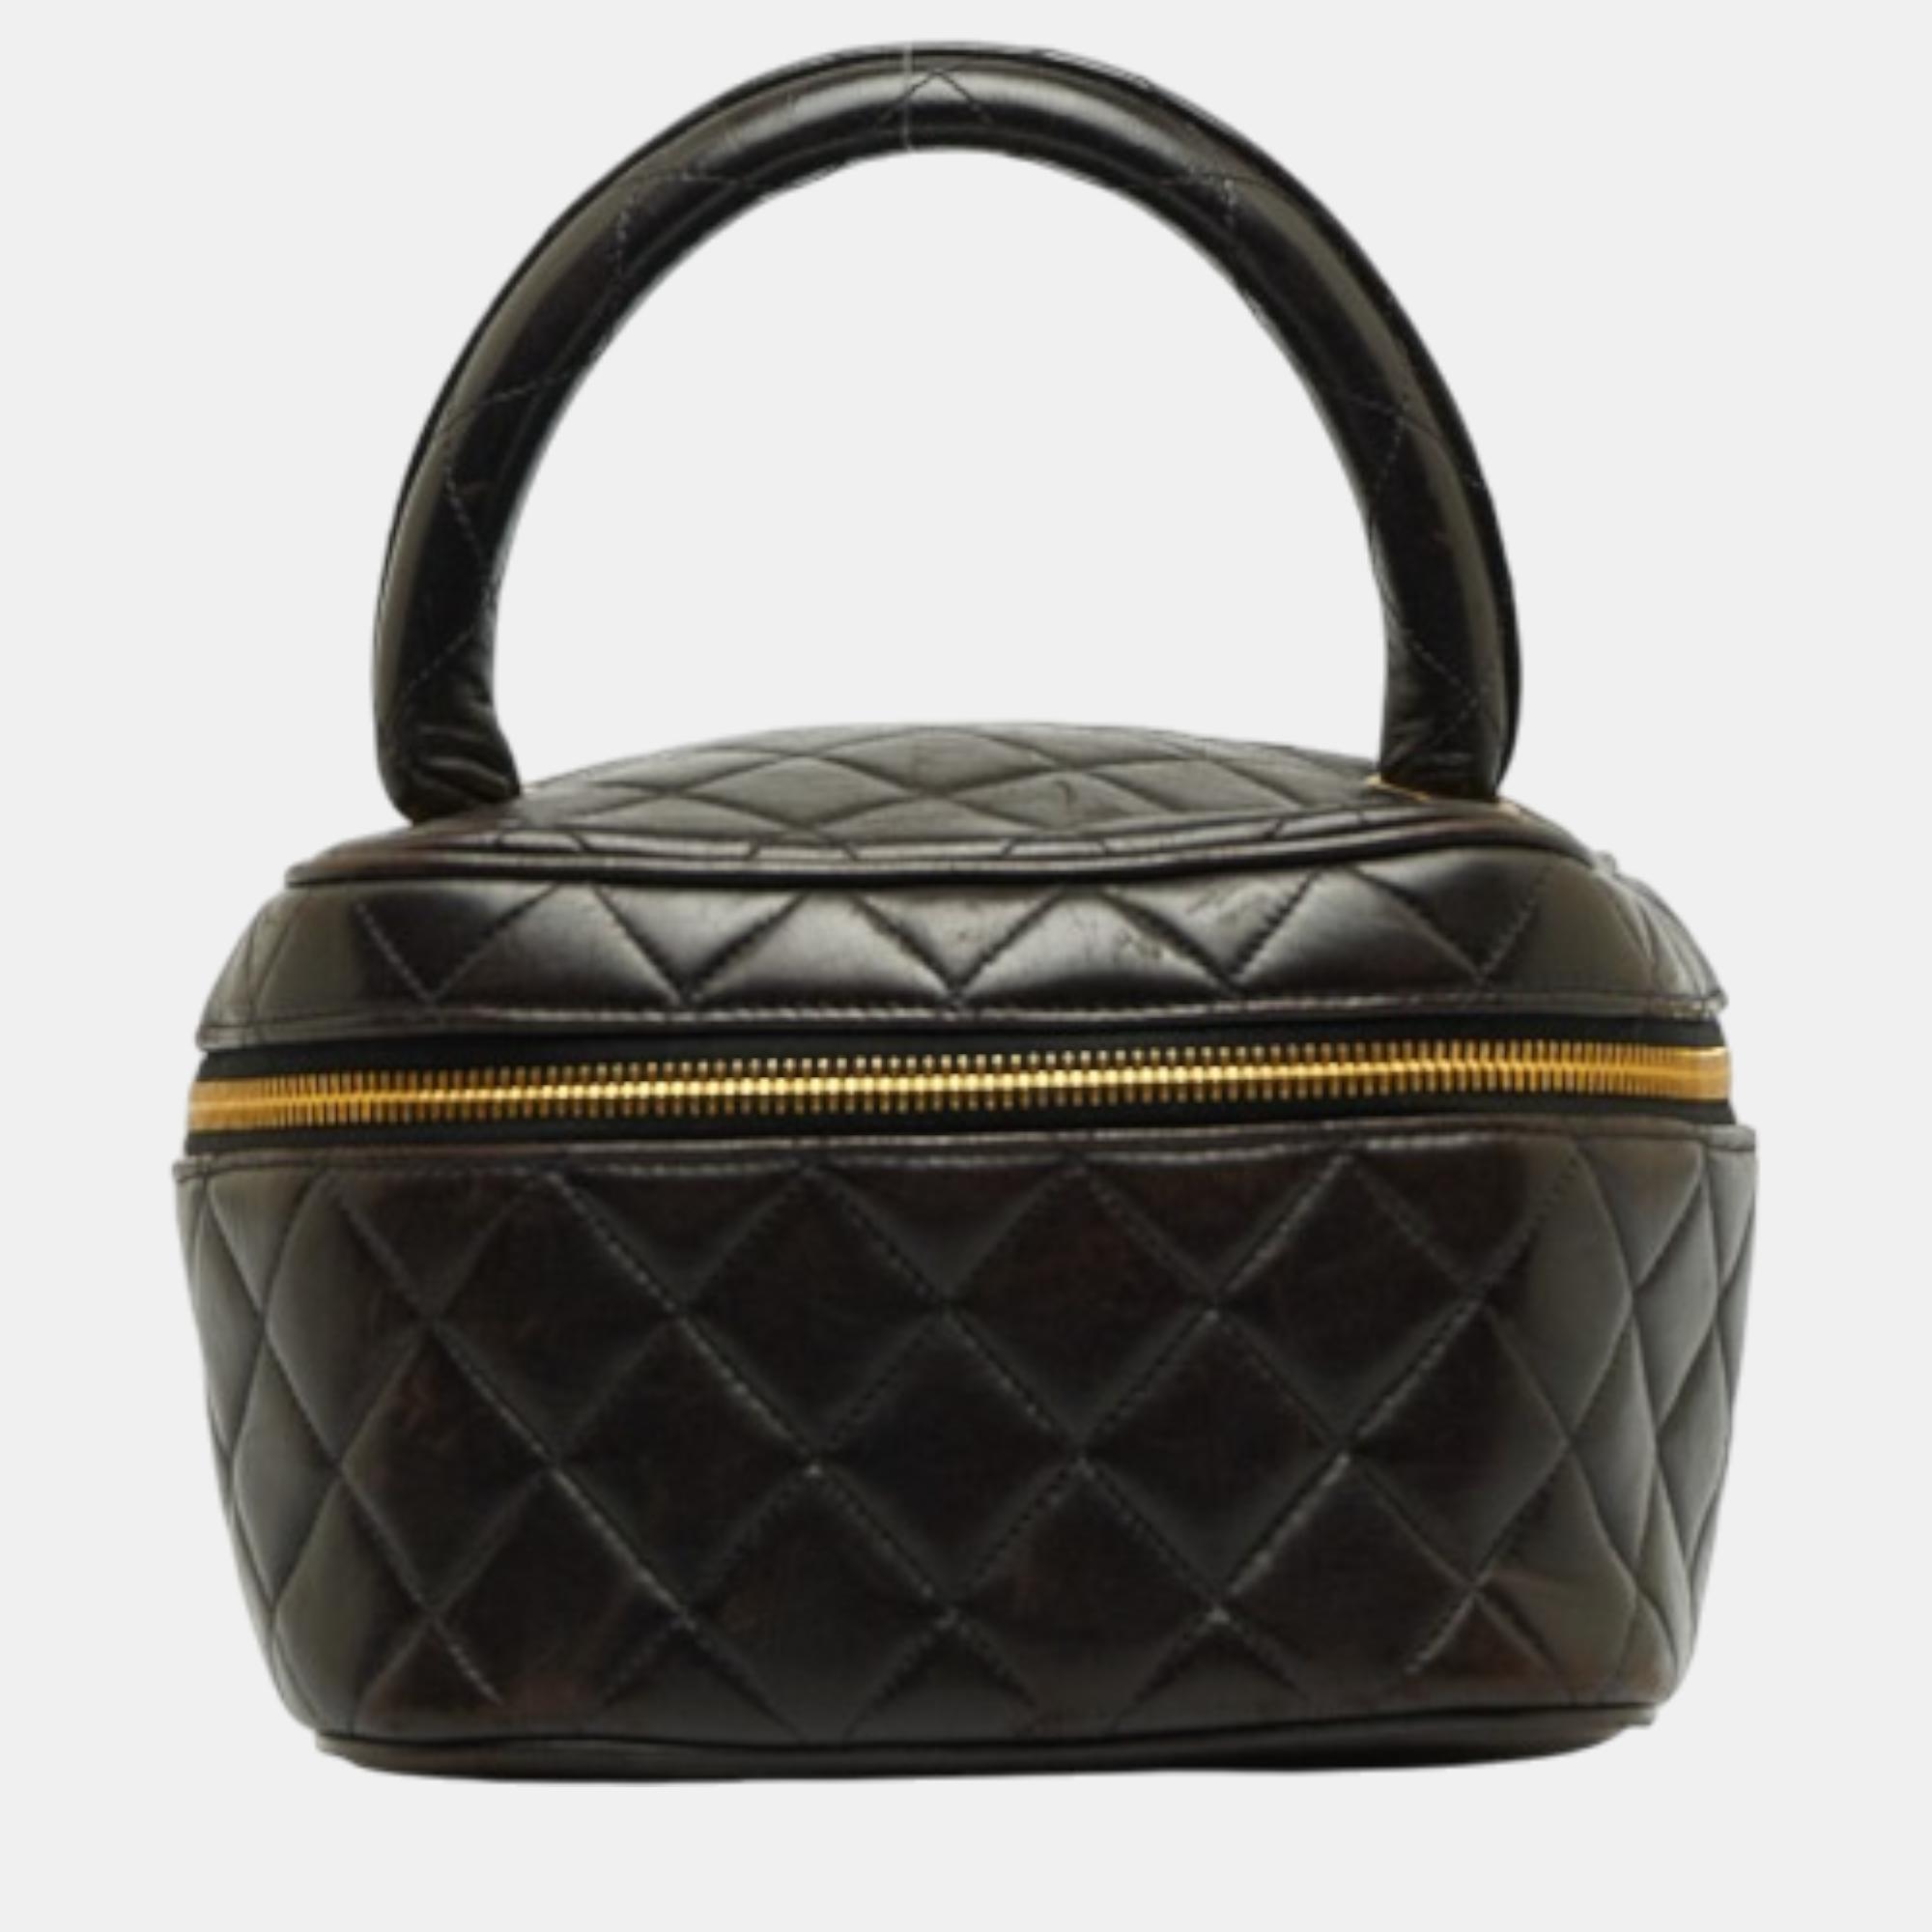 Chanel black leather quilted cc vanity case